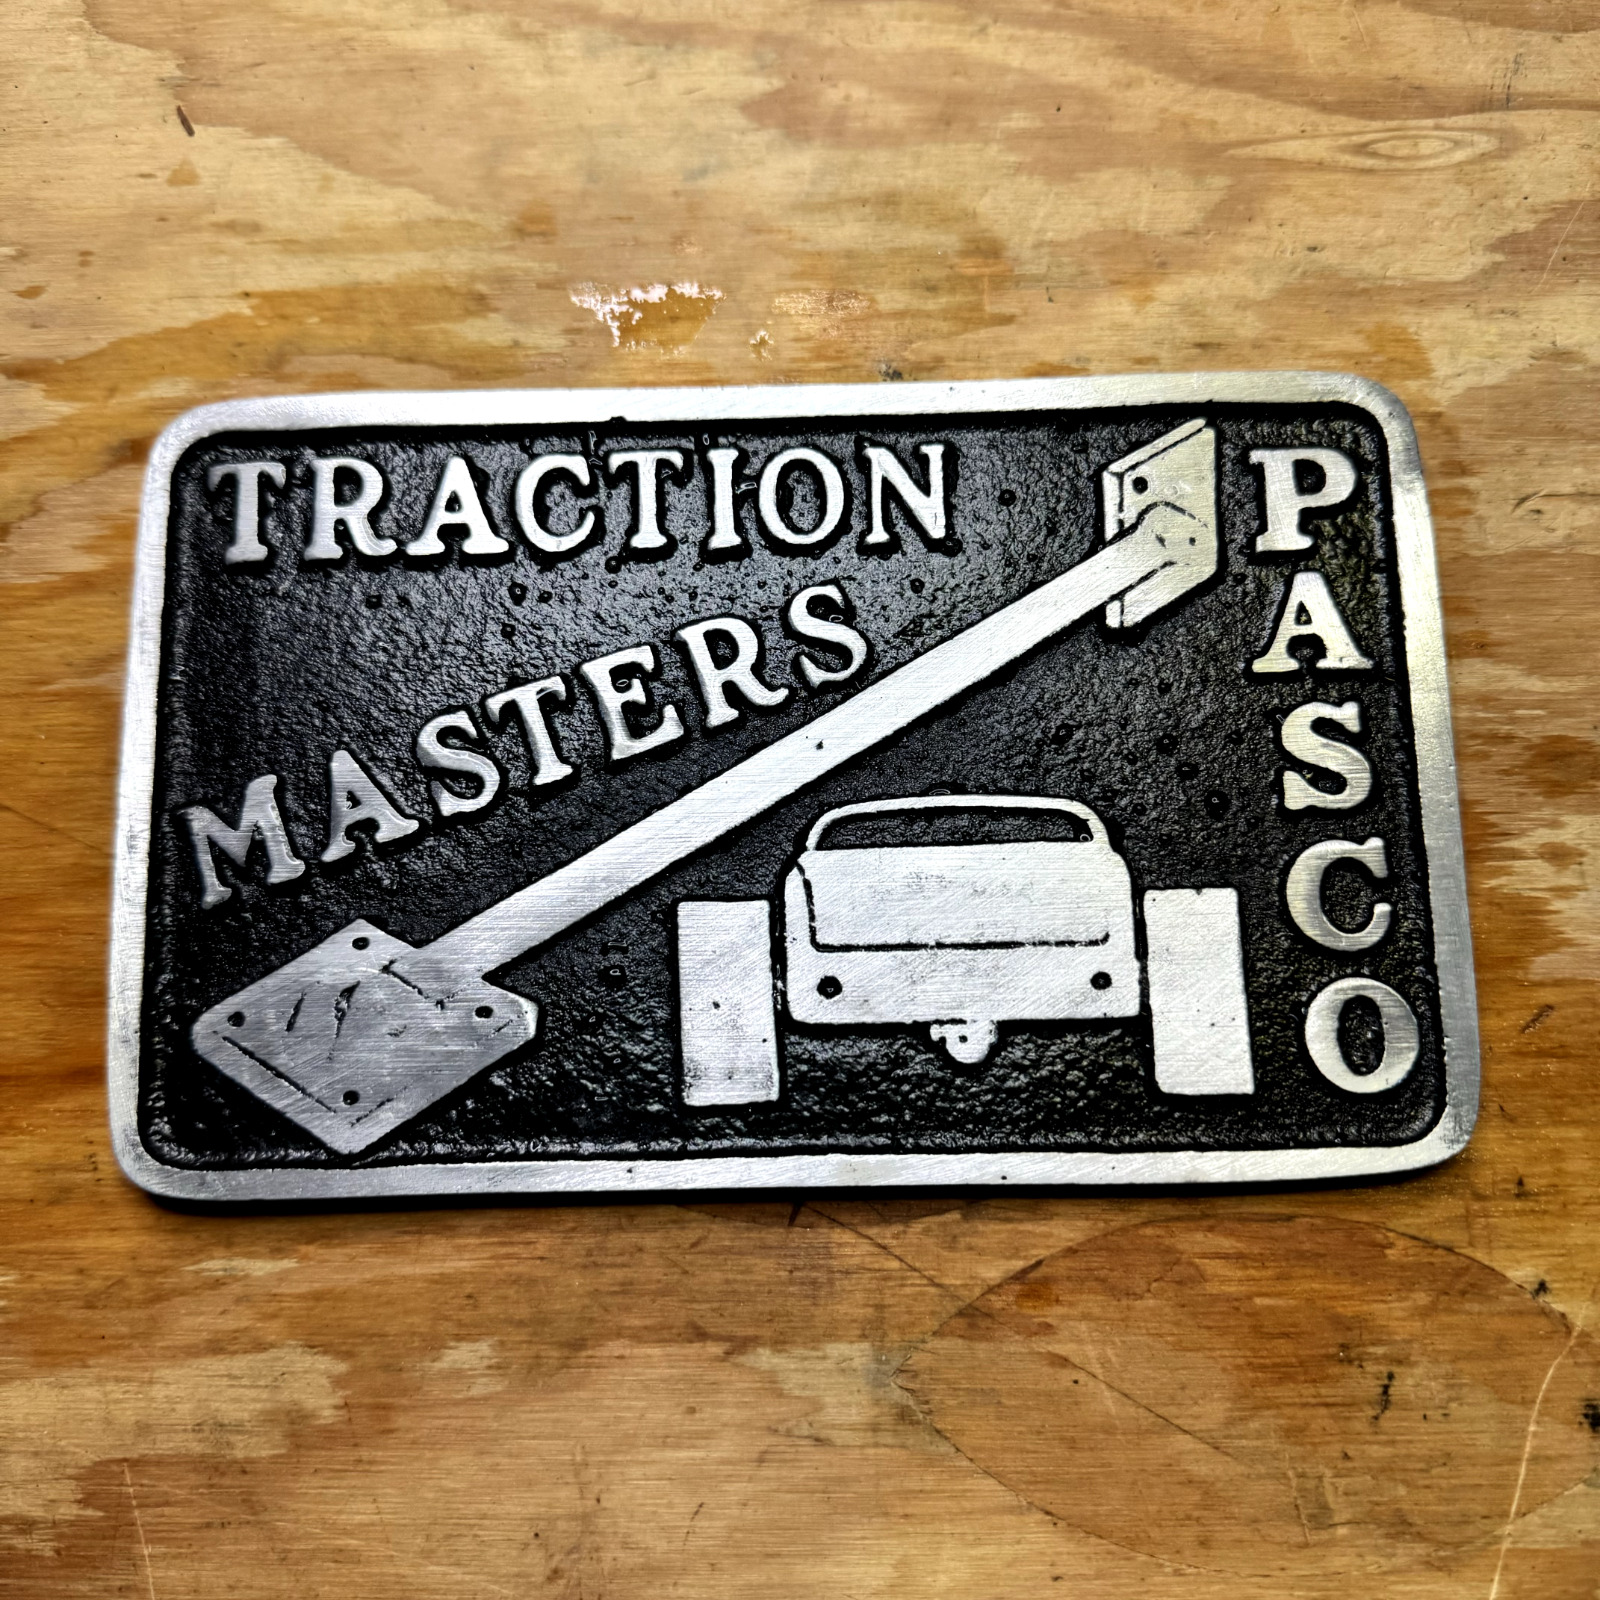 Traction Masters PASCO Car Club Plaque